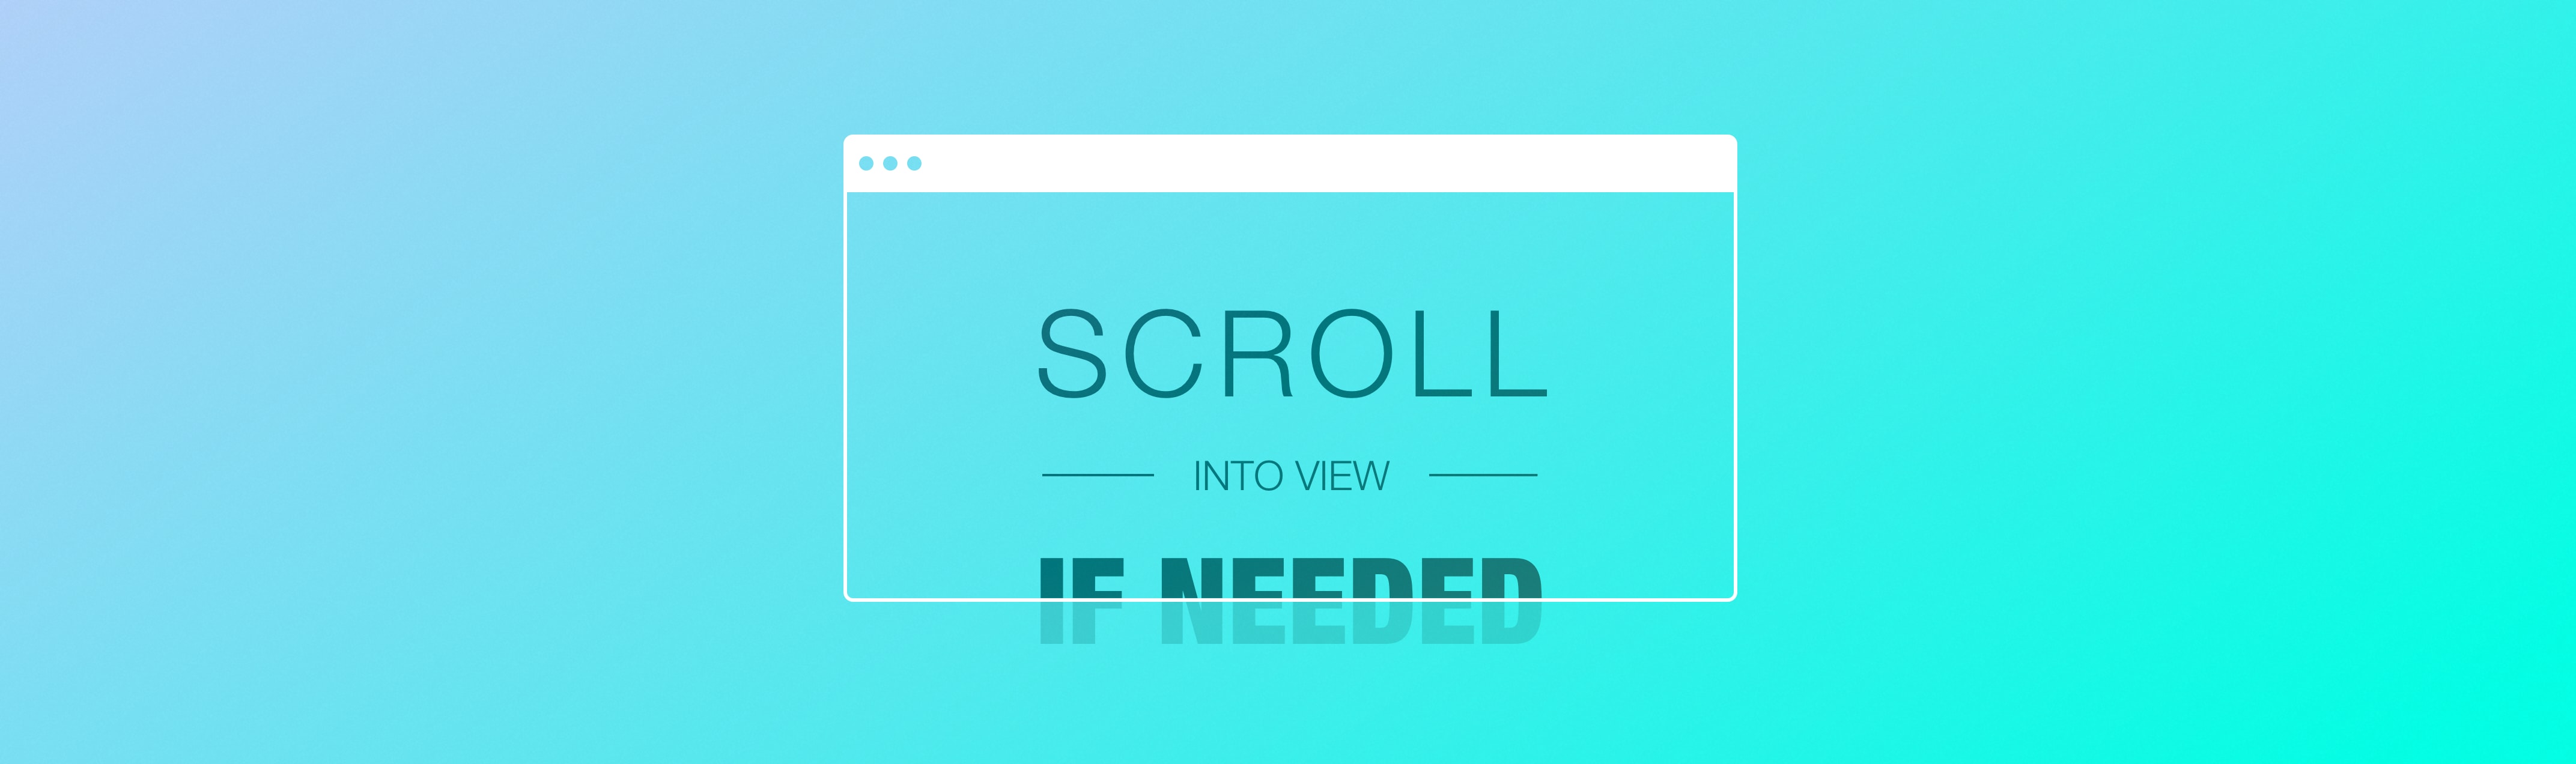 scroll-into-view-if-needed